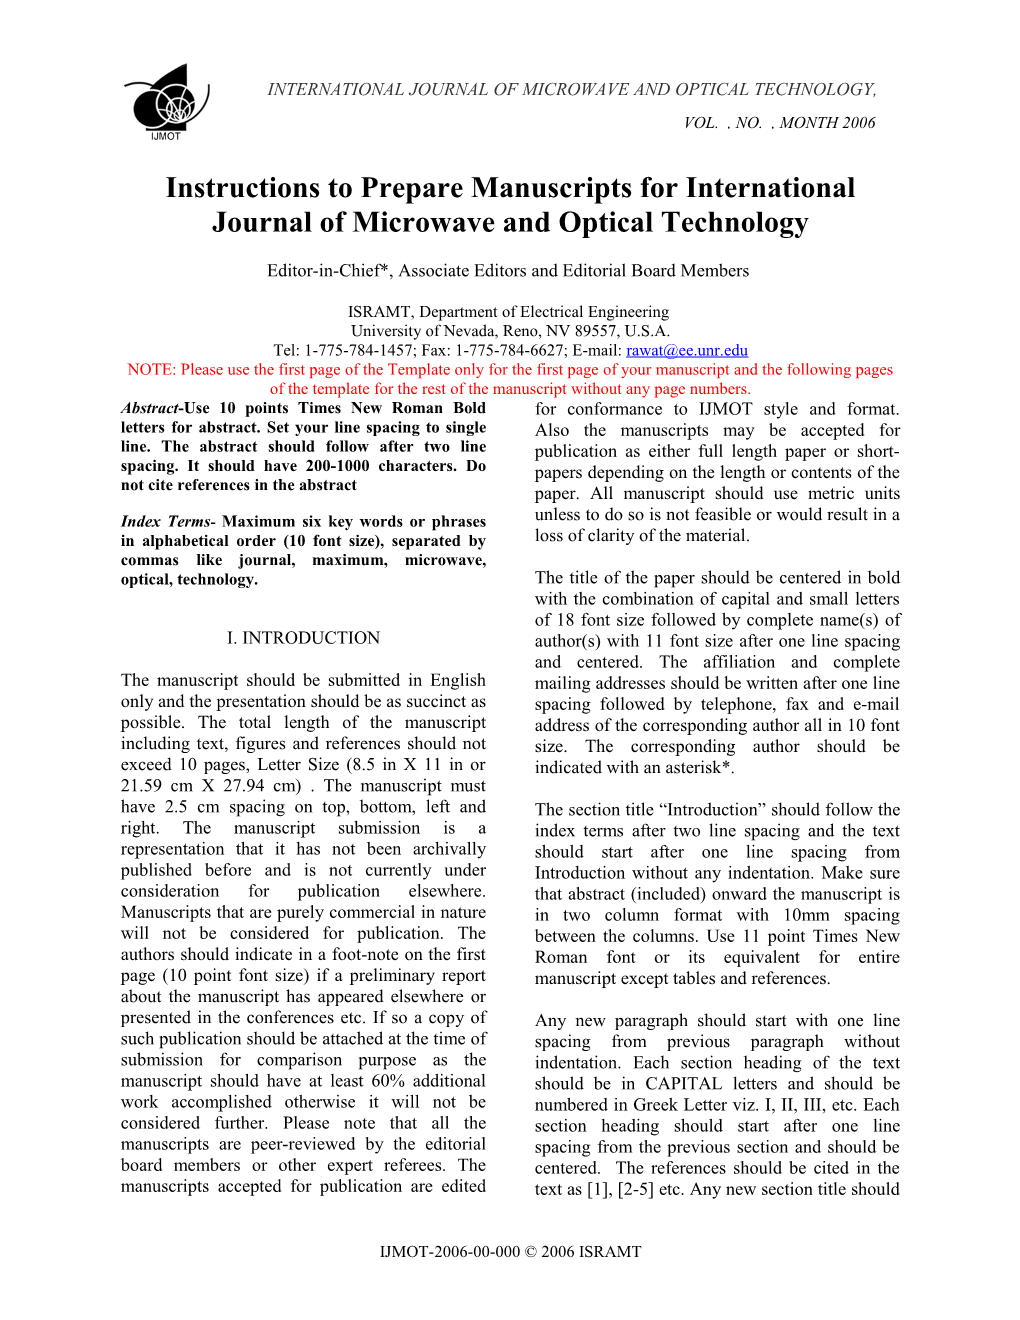 Instructions to Prepare Manuscripts for International Journal of Microwave and Optical